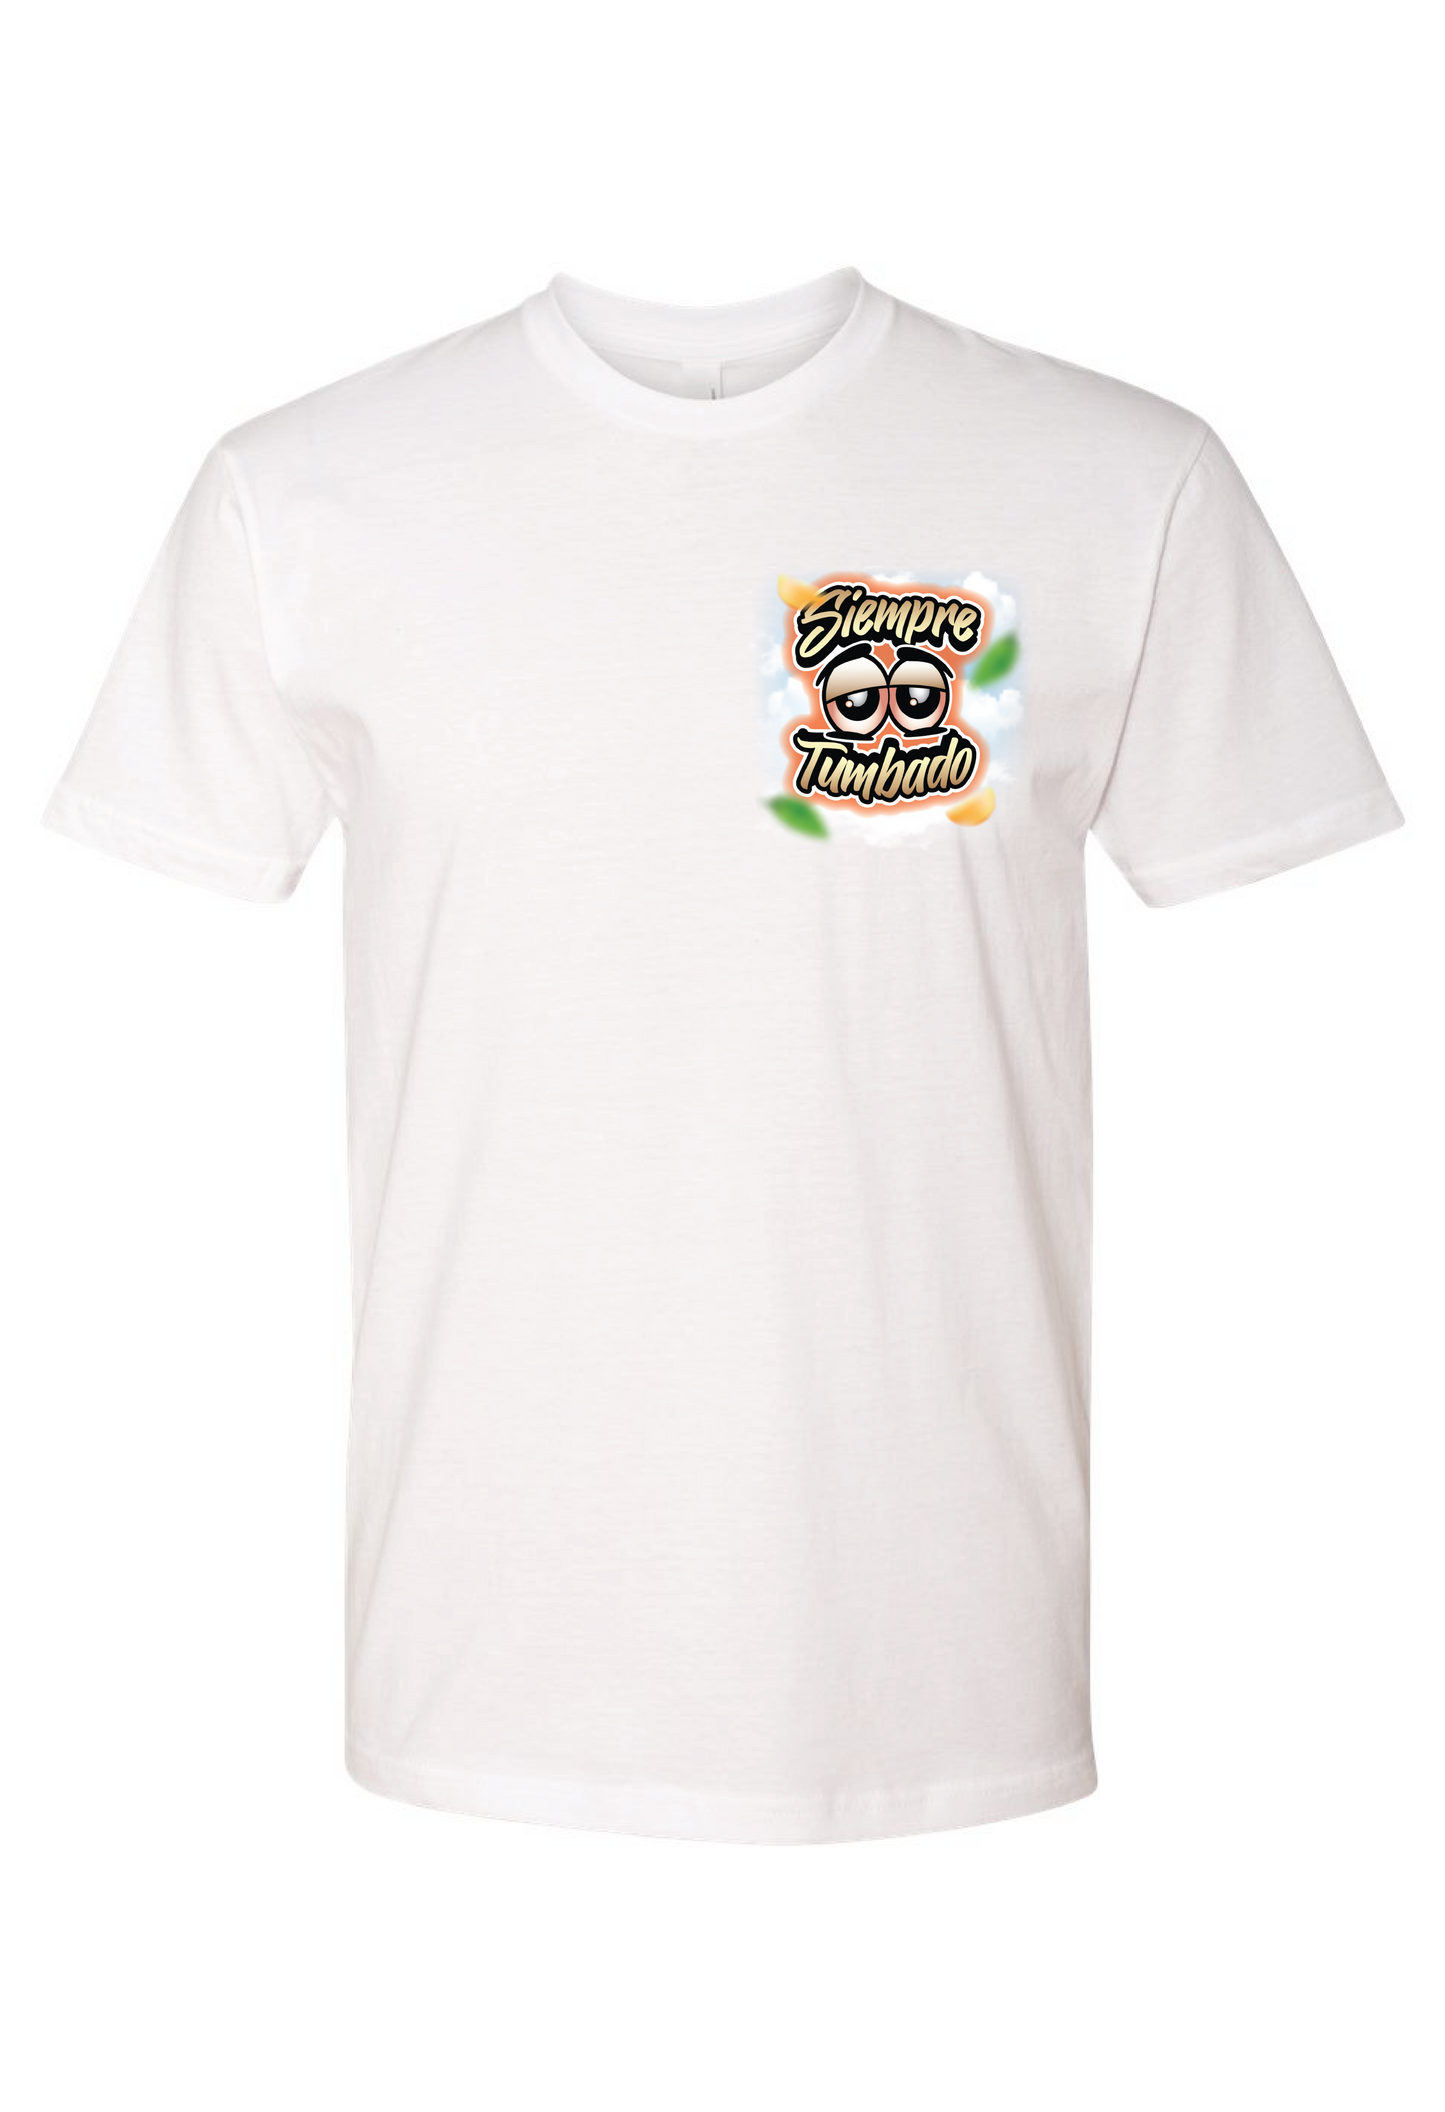 Welcome to FL Gator Short Sleeve Dri-Fit White/Tan